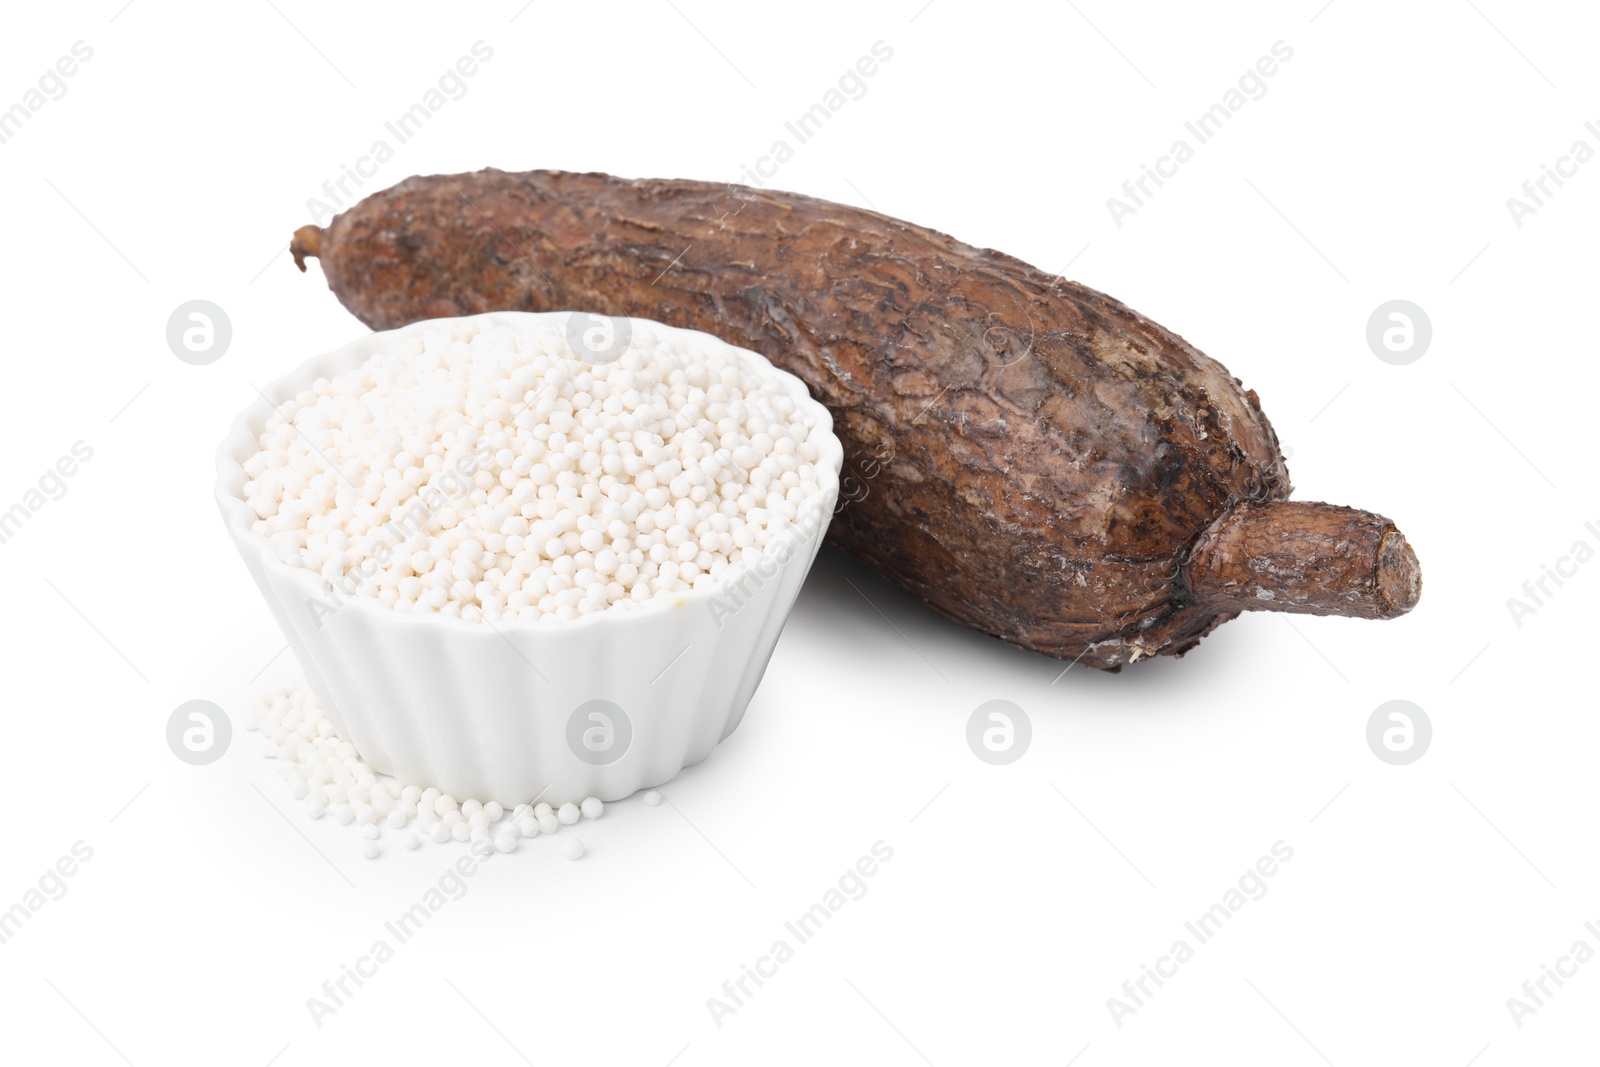 Photo of Tapioca pearls in bowl and cassava root isolated on white